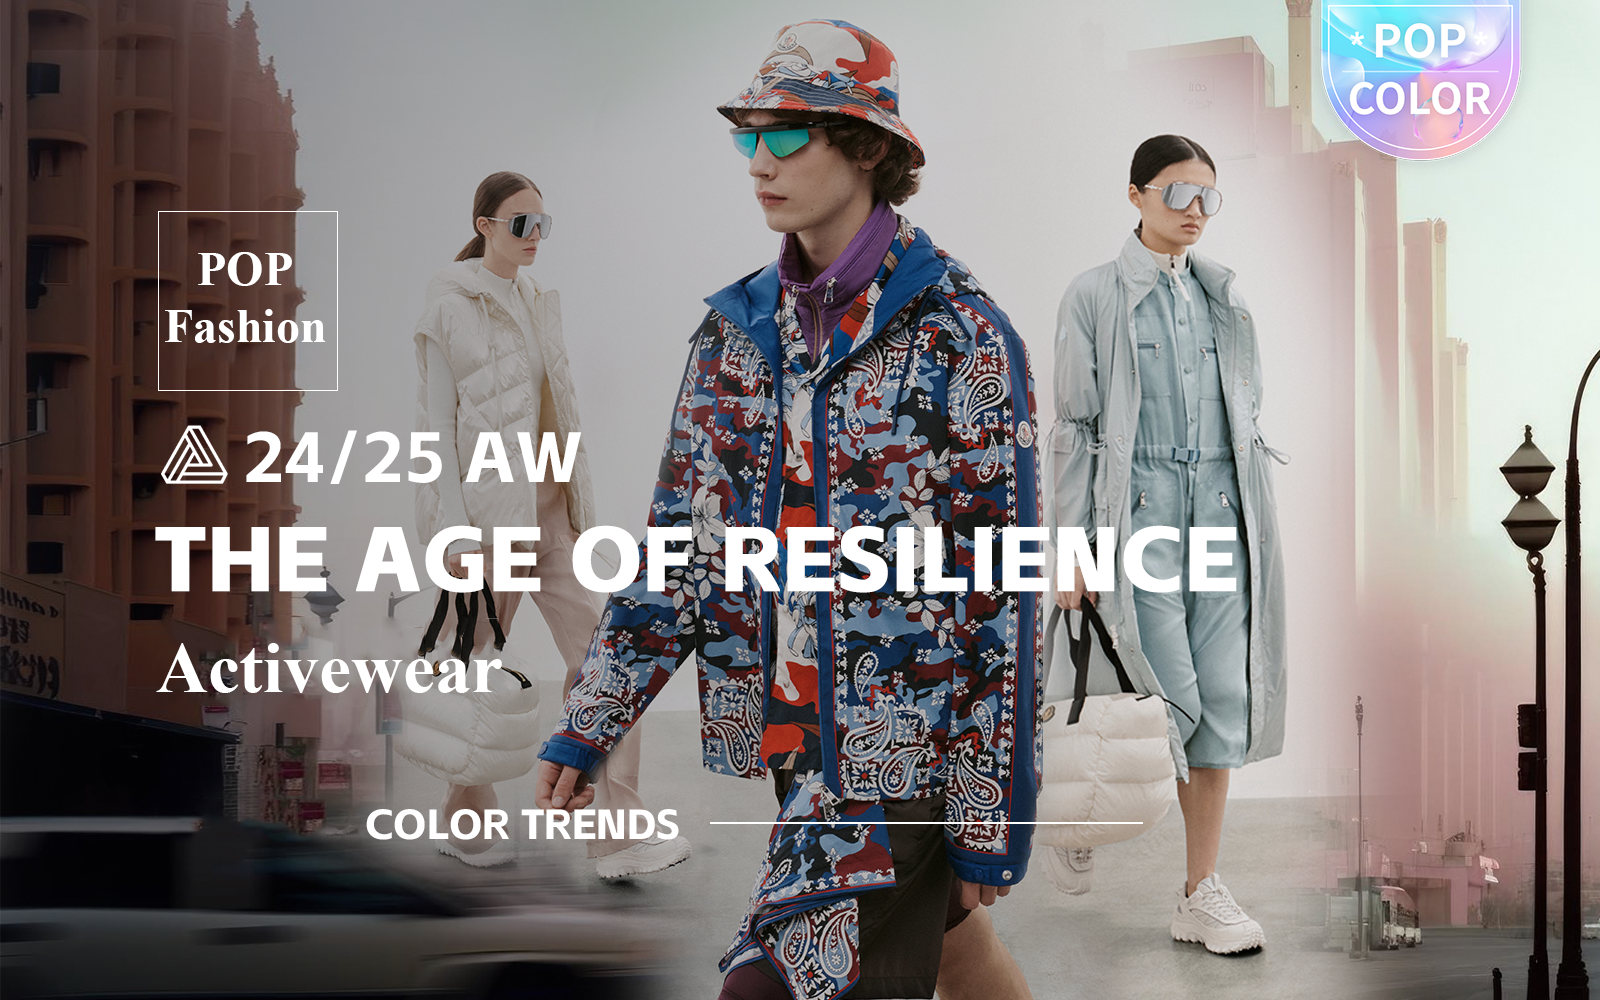 The Age of Resilience -- The A/W 24/25 Activewear Color Trend